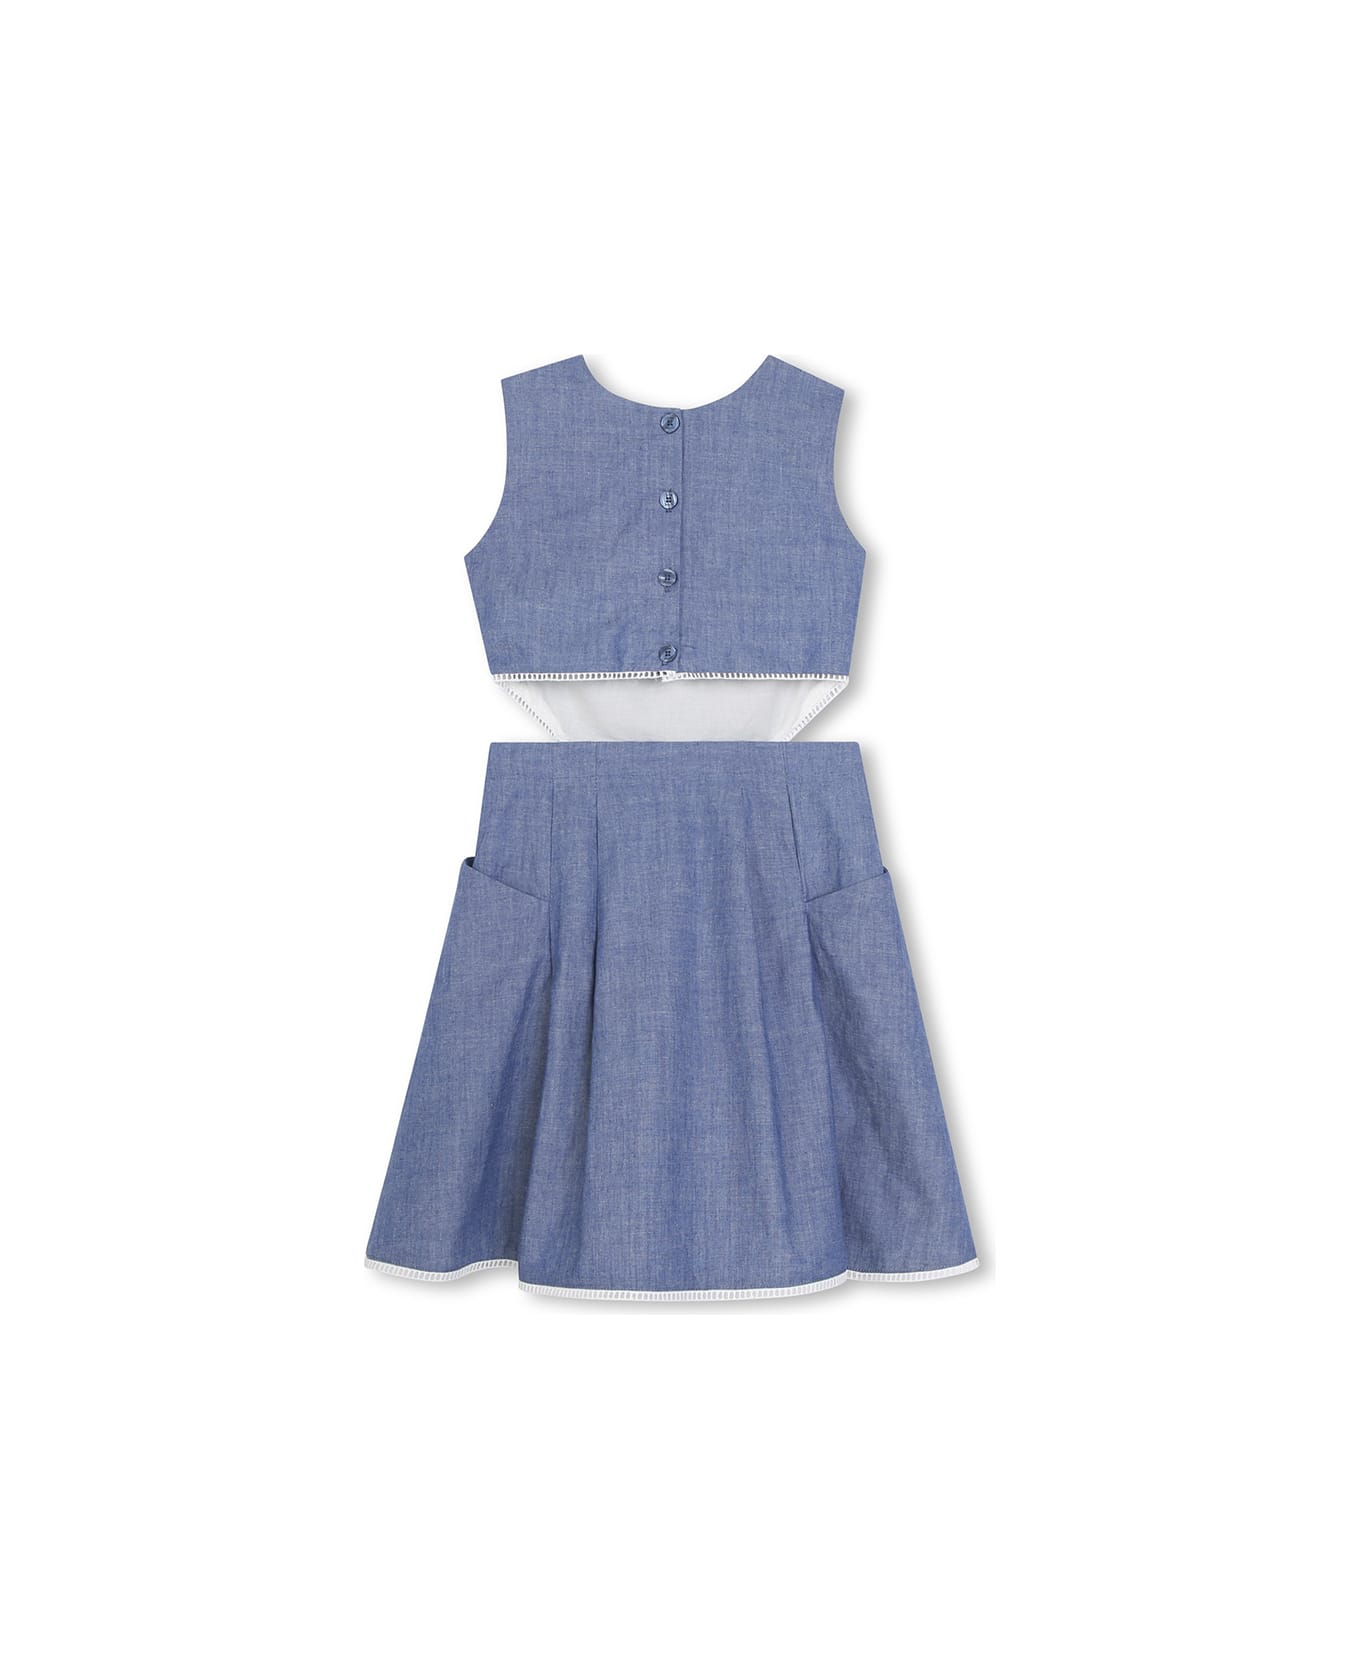 Chloé Medium Blue Sleeveless Dress With Embroidery And Cut-out - Blue